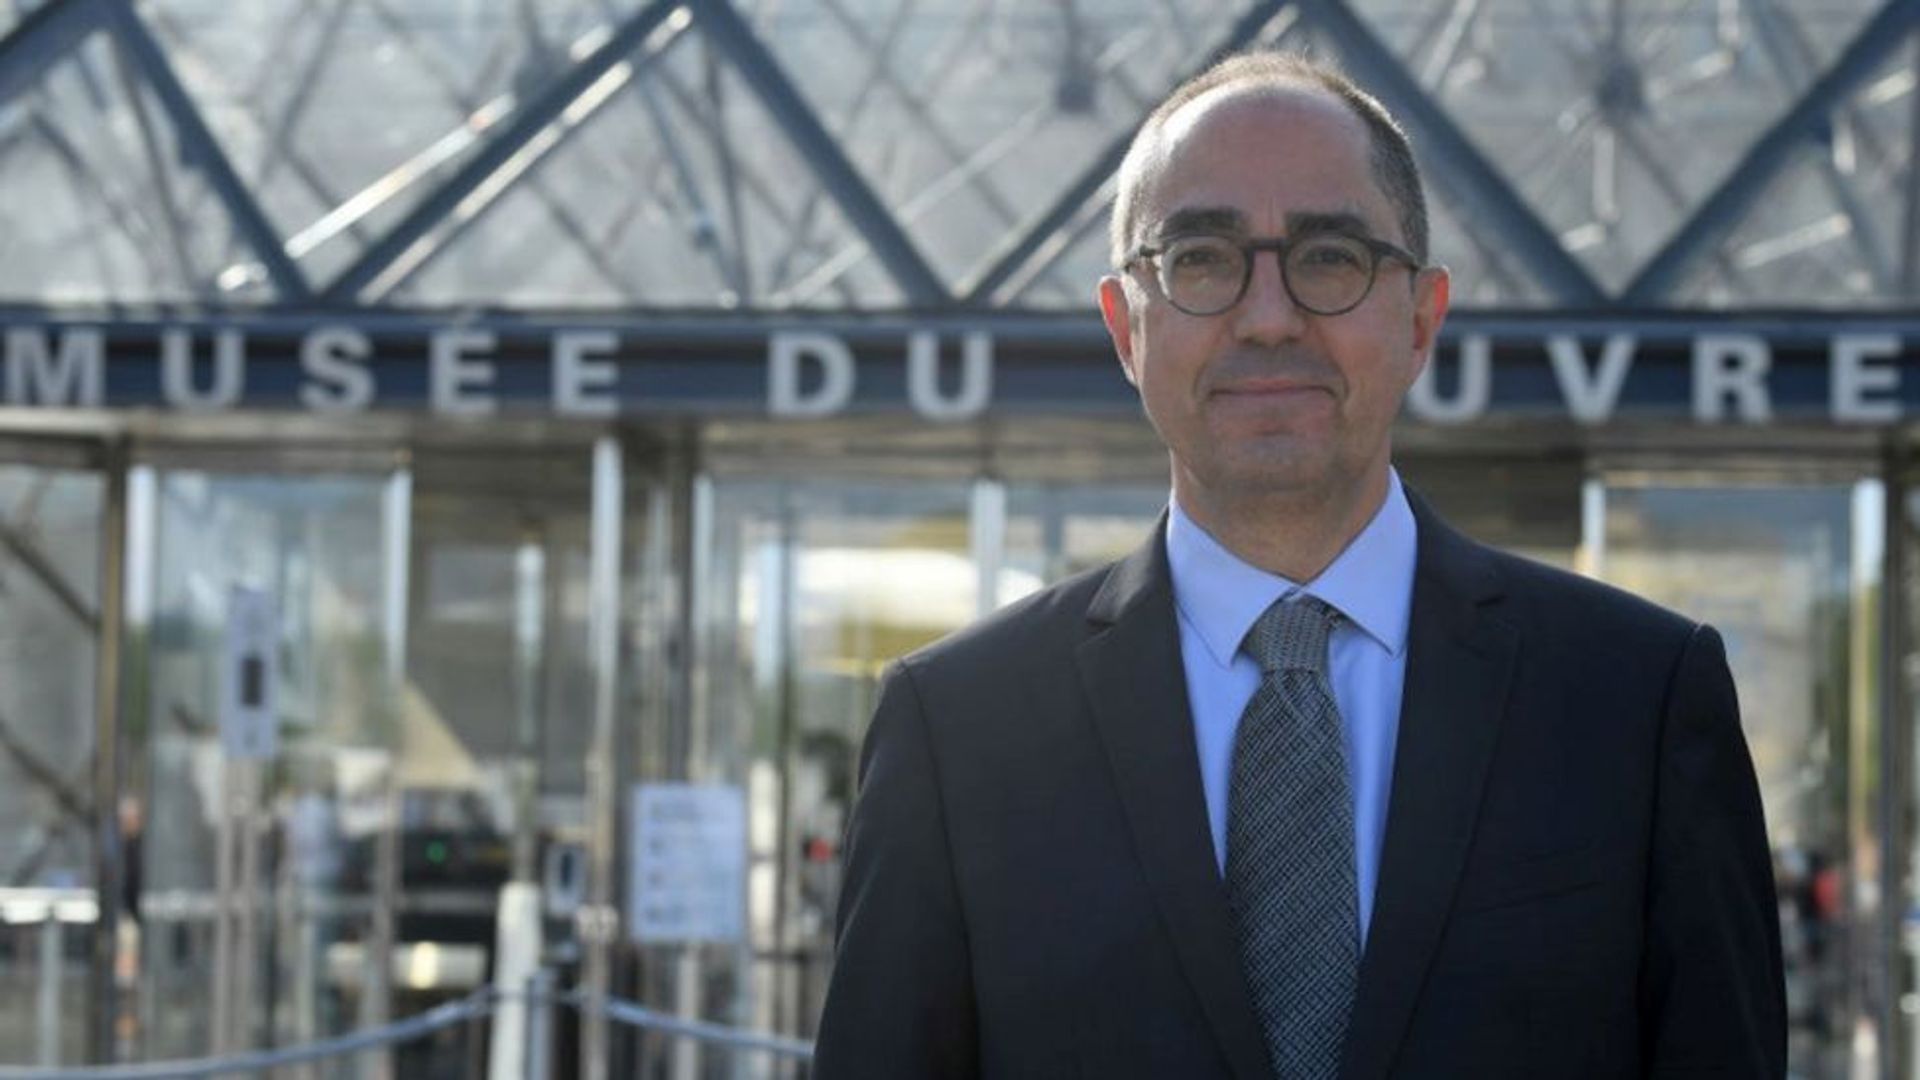 Former Louvre head Jean-Luc Martinez has “vigorously denied” all allegations. Getty